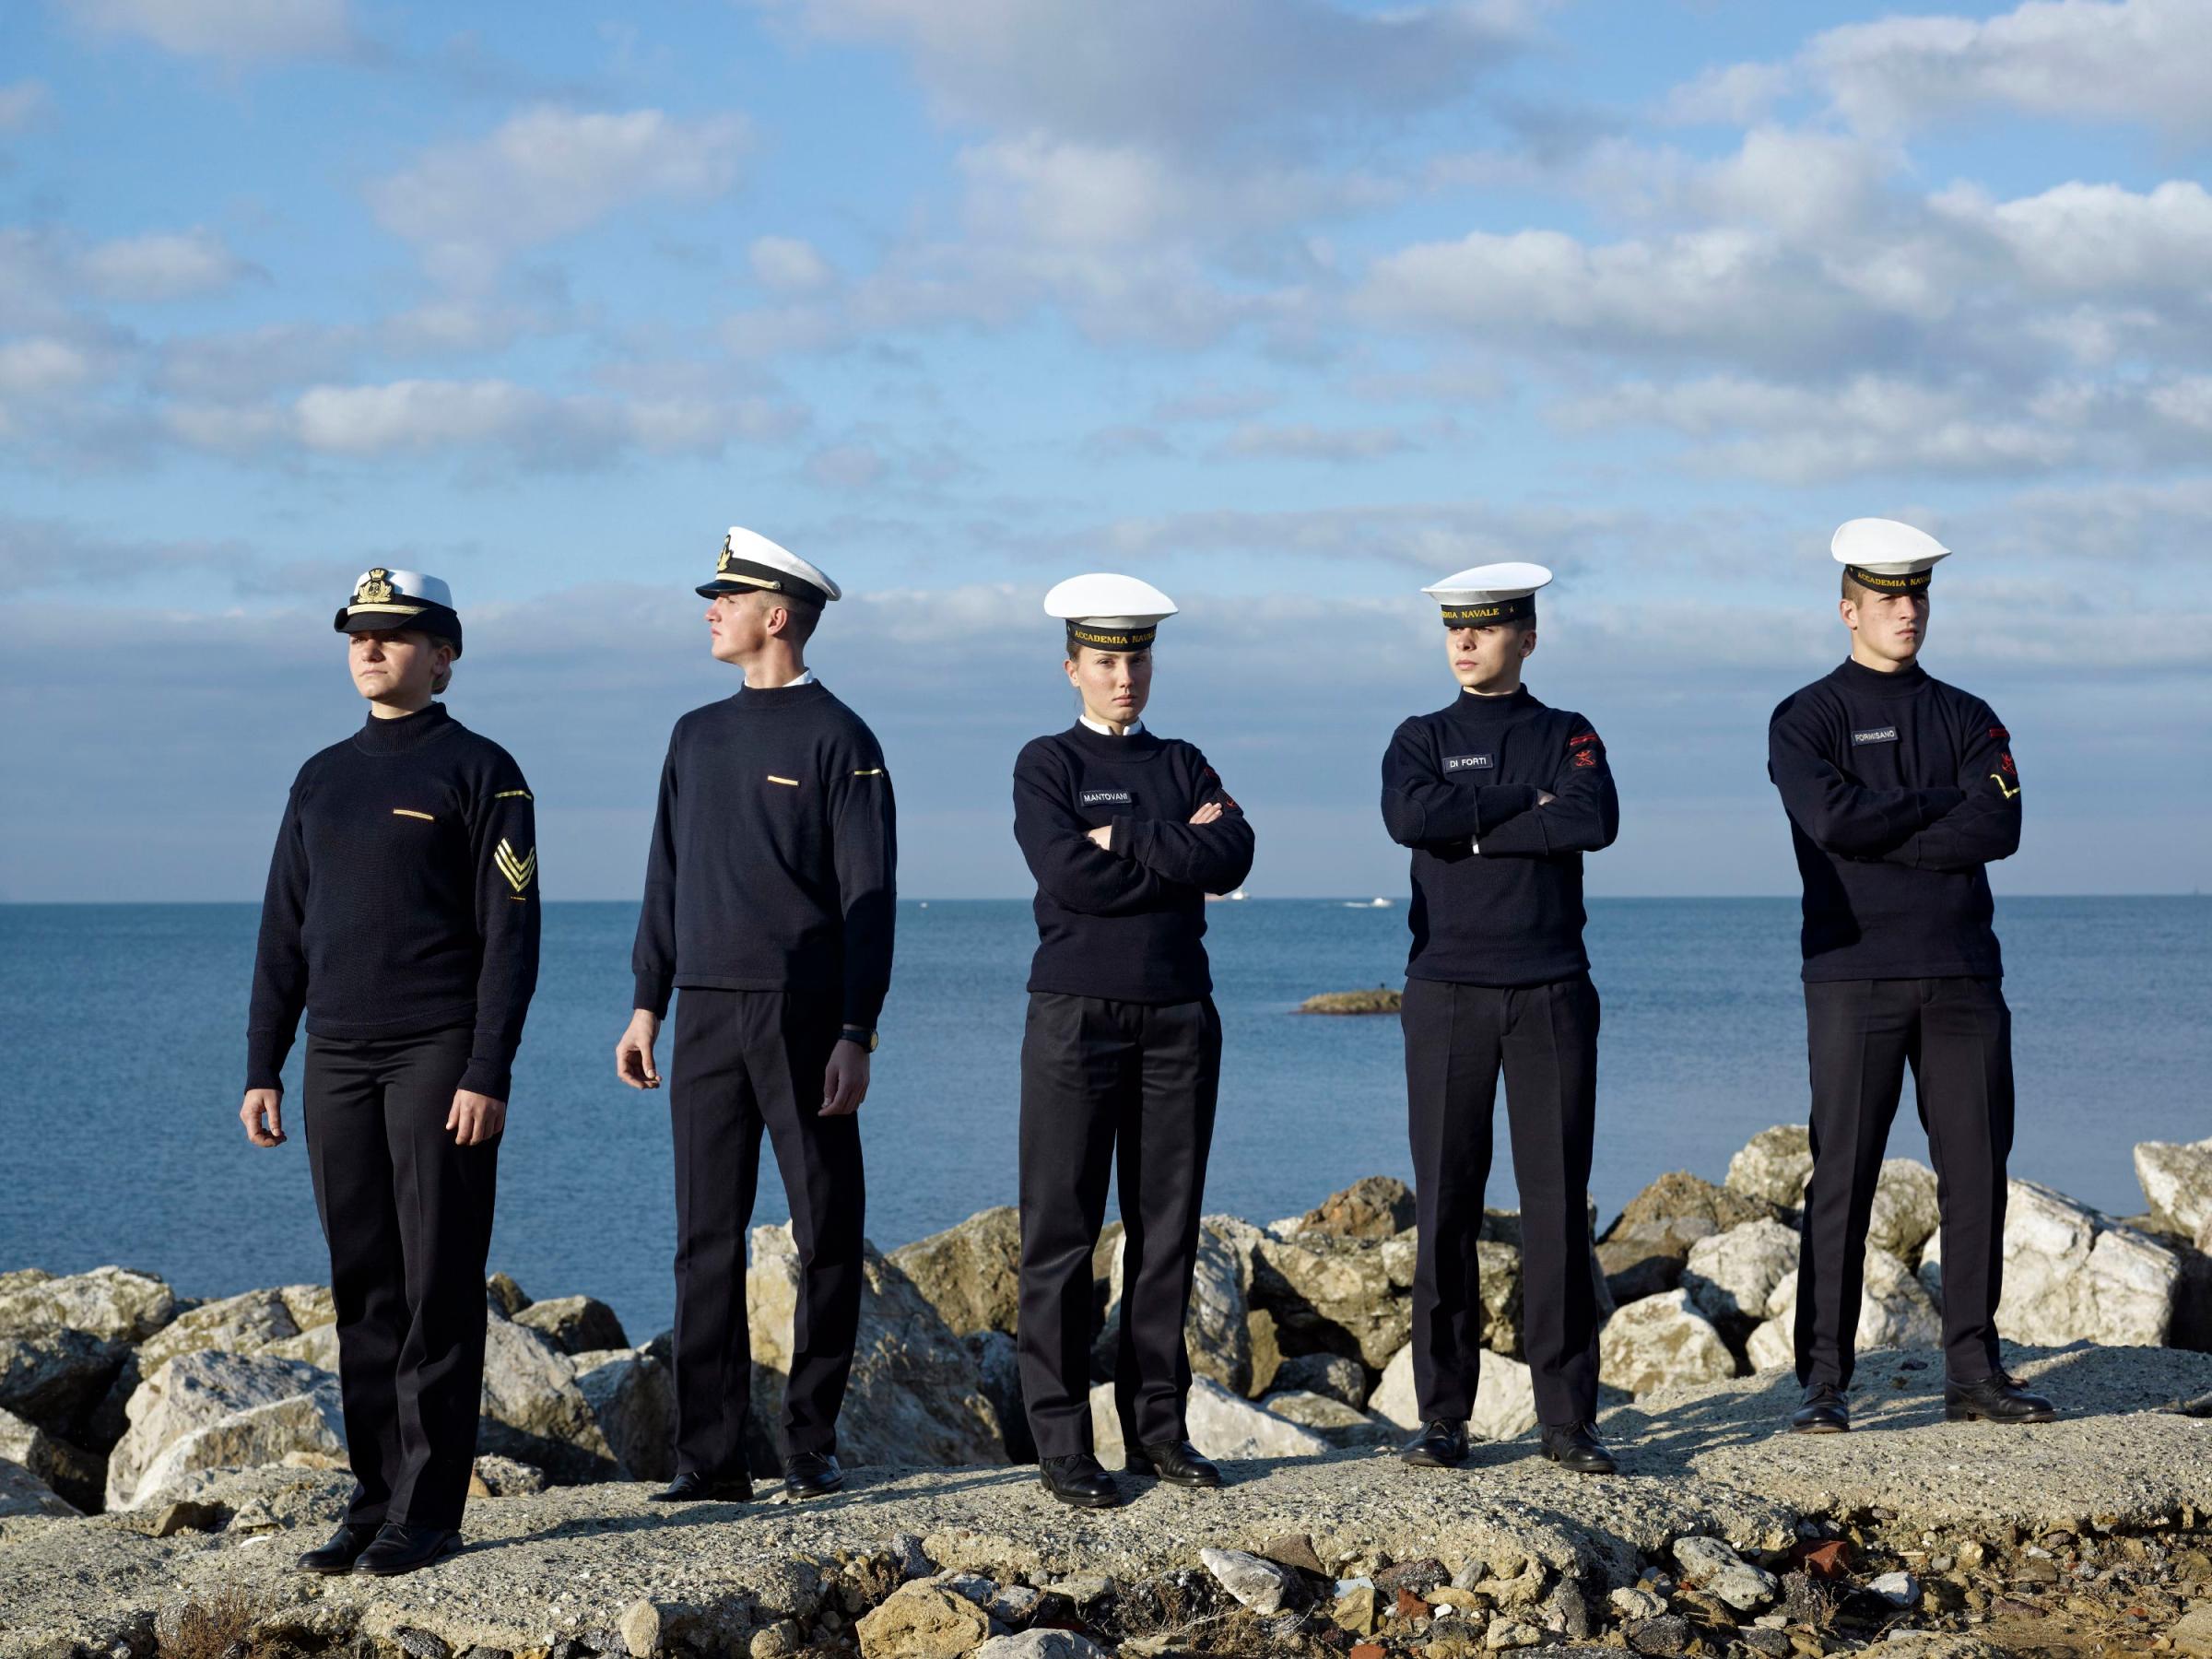 Cadets in the seafront, Italian Naval Academy, Livorno, Italy, Nov. 21, 2012.